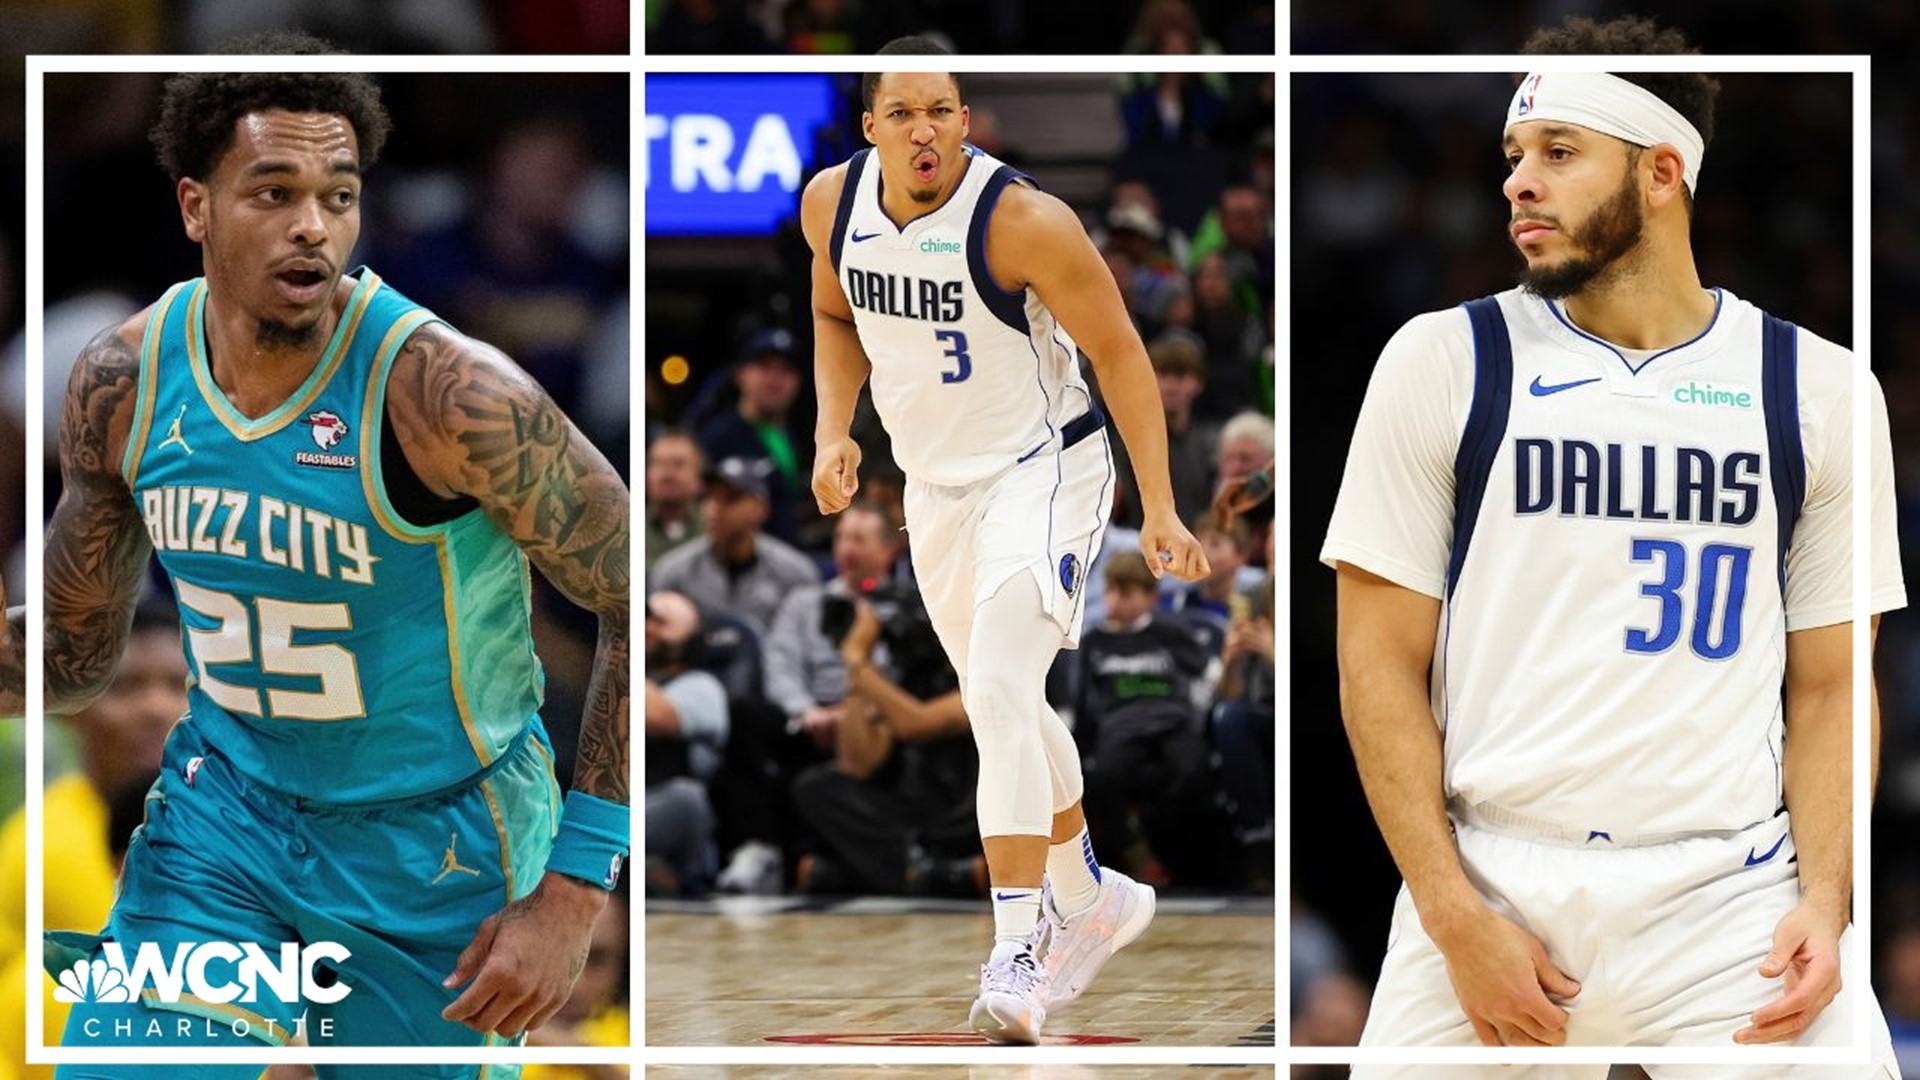 The Charlotte Hornets were active at the NBA trade deadline, trading away two players. WCNC's Nick Carboni and Locked On's Walker Mehl break it all down.